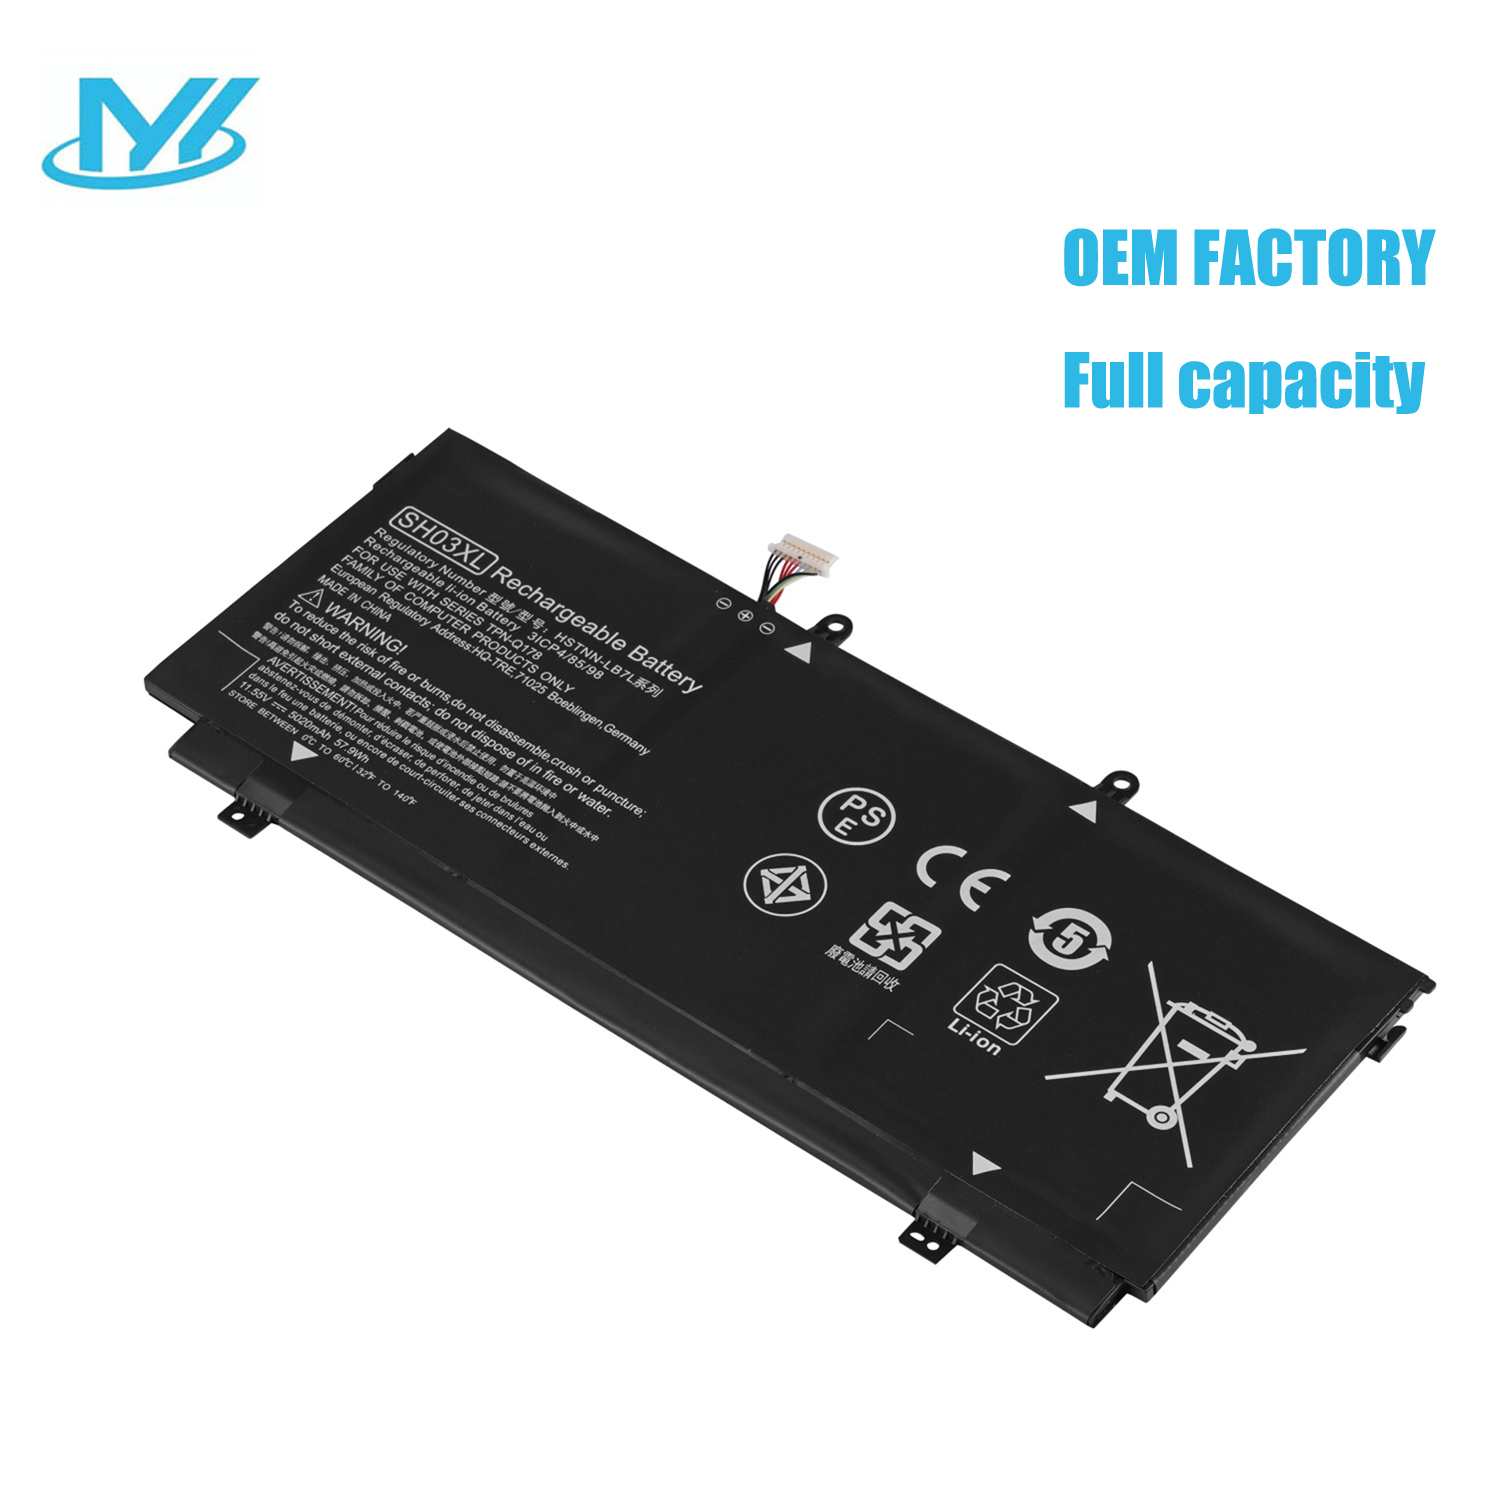 SH03XL rechargeable lithium ion Notebook battery Laptop battery For HP Spectre X360 13-W021TU 13-W022TU 13-W033ng 13-W0xx X360 13-AC015TU 13-AC013TU 11.55V 57.9Wh 5020mAh 3cell